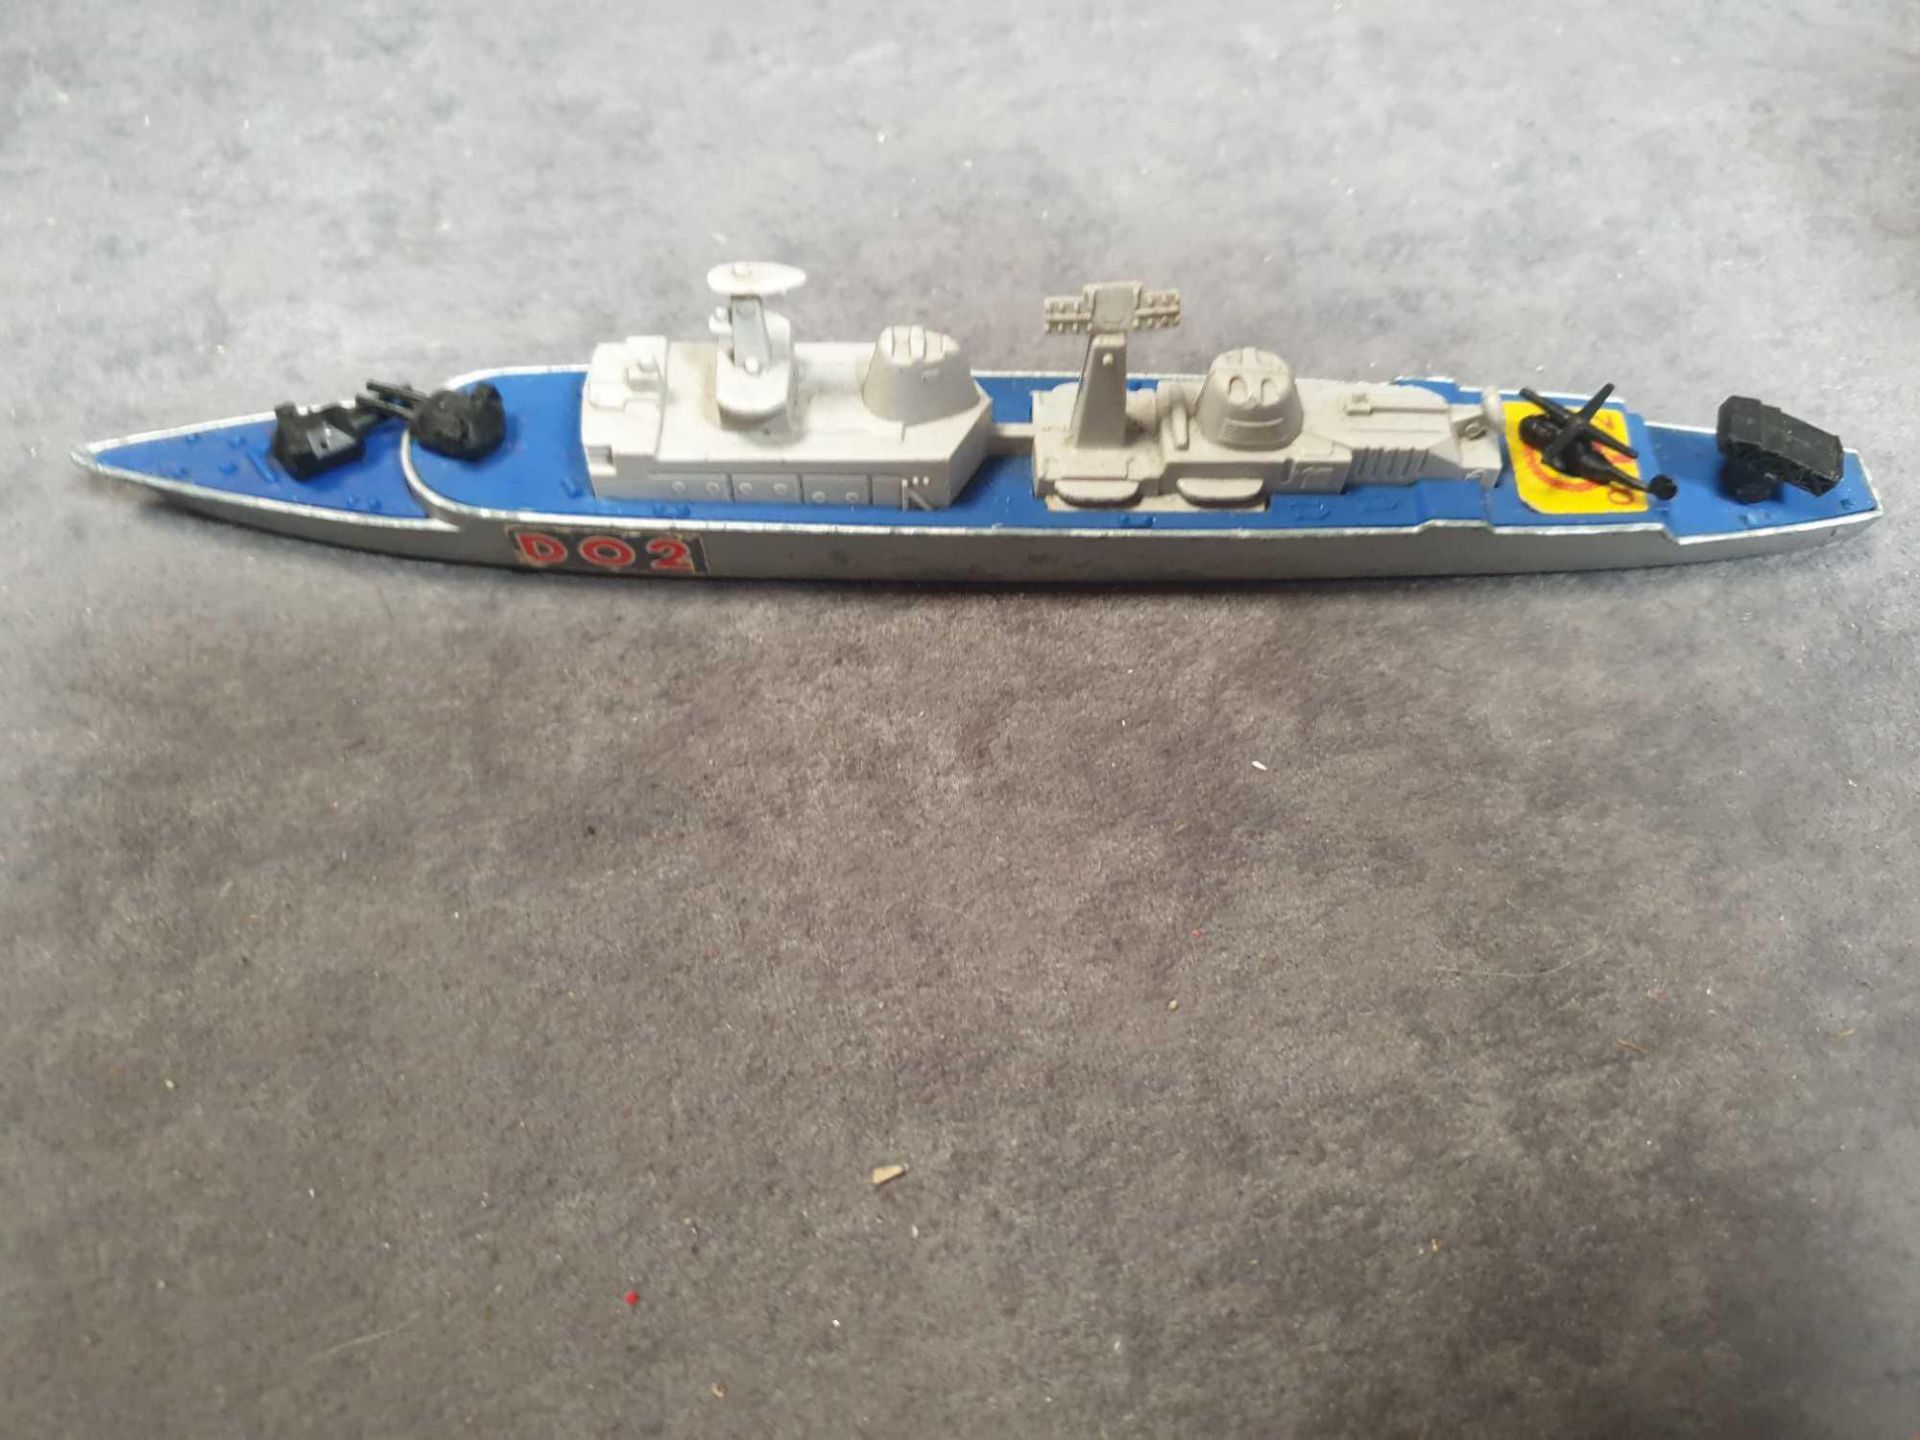 Matchbox Sea Kings Lesney K308 Guided Missile Destroyer Ship D02,1976 Diecast Unboxed